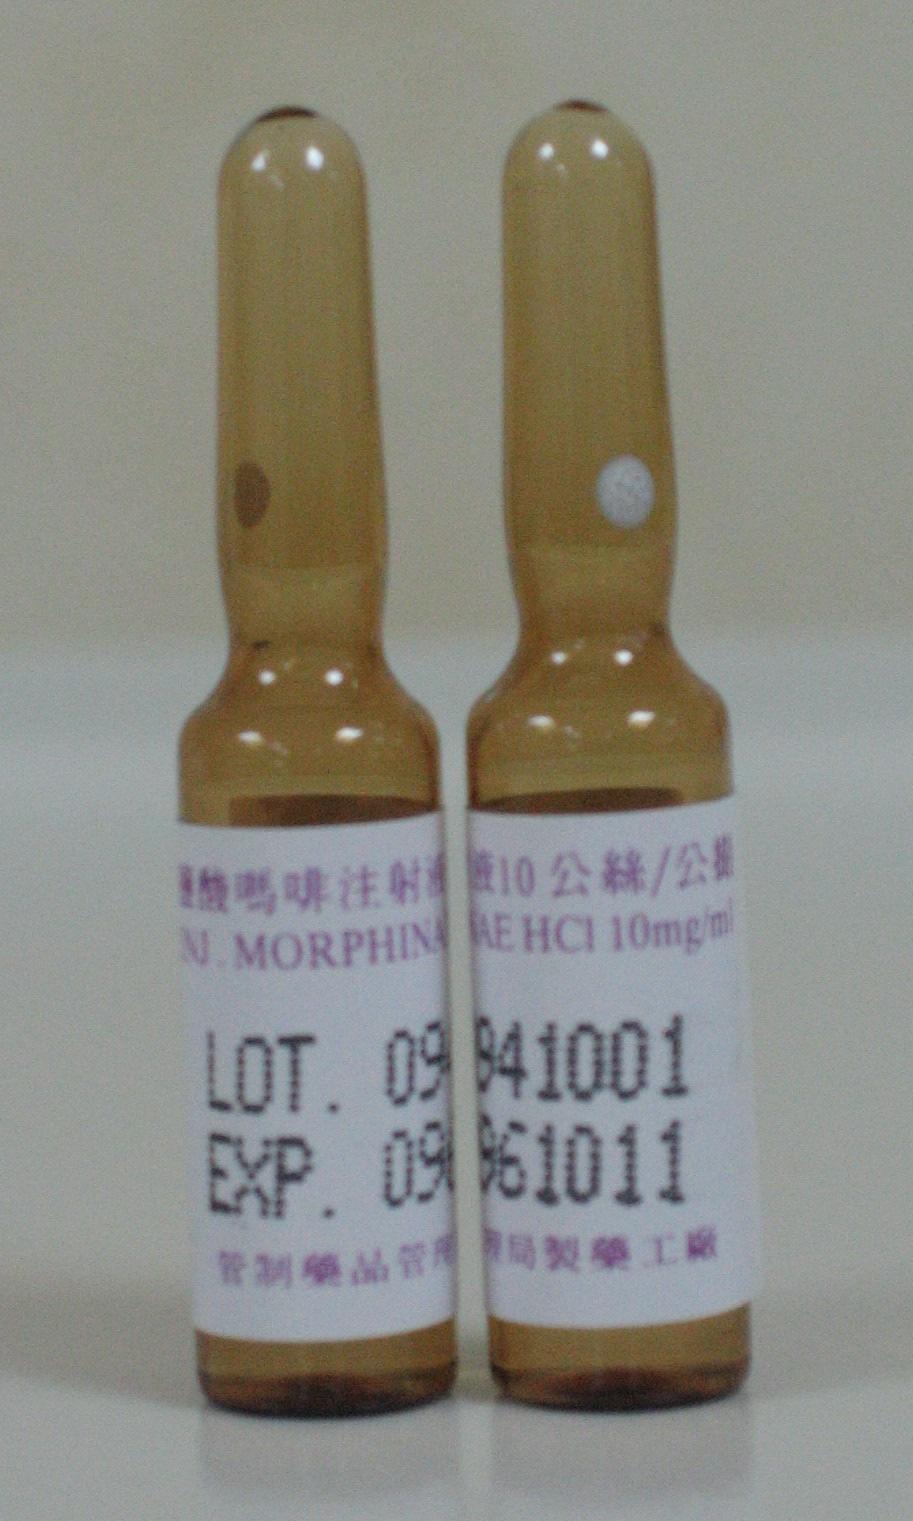 MgSO4 - dosage 1. Cardiac arrest (hypo-mg or TDP) - 1~2 g diluted in 10 ml of D5W IV push 2.